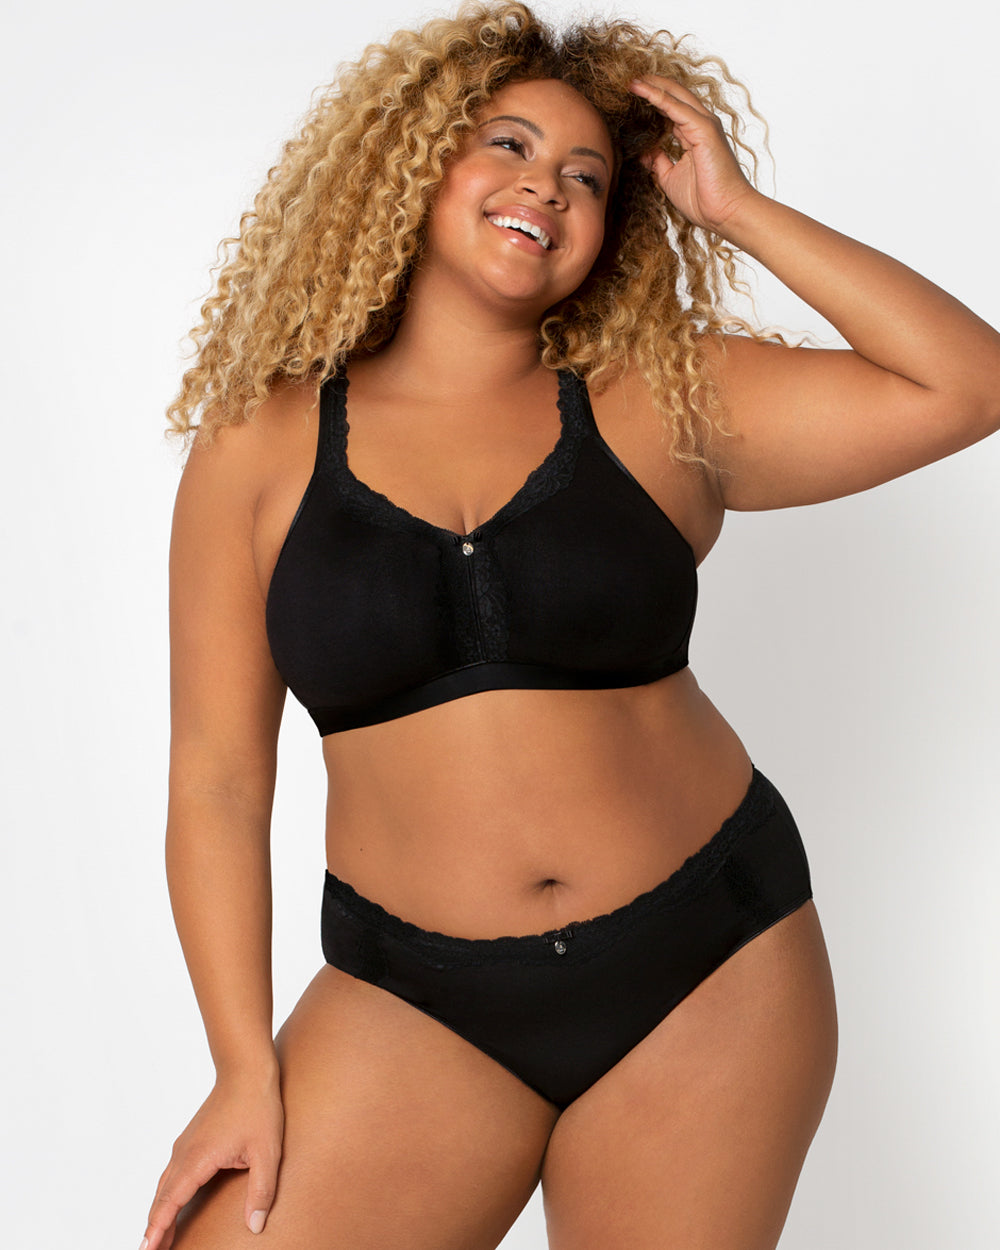 a la mode intimates on X: Buy 3 Curvy Couture bras/panties & get 1 FREE!  Beat the late summer heat with deep breathing cotton luxuryahhhh. The  Curvy Couture Cotton Luxe Bra in